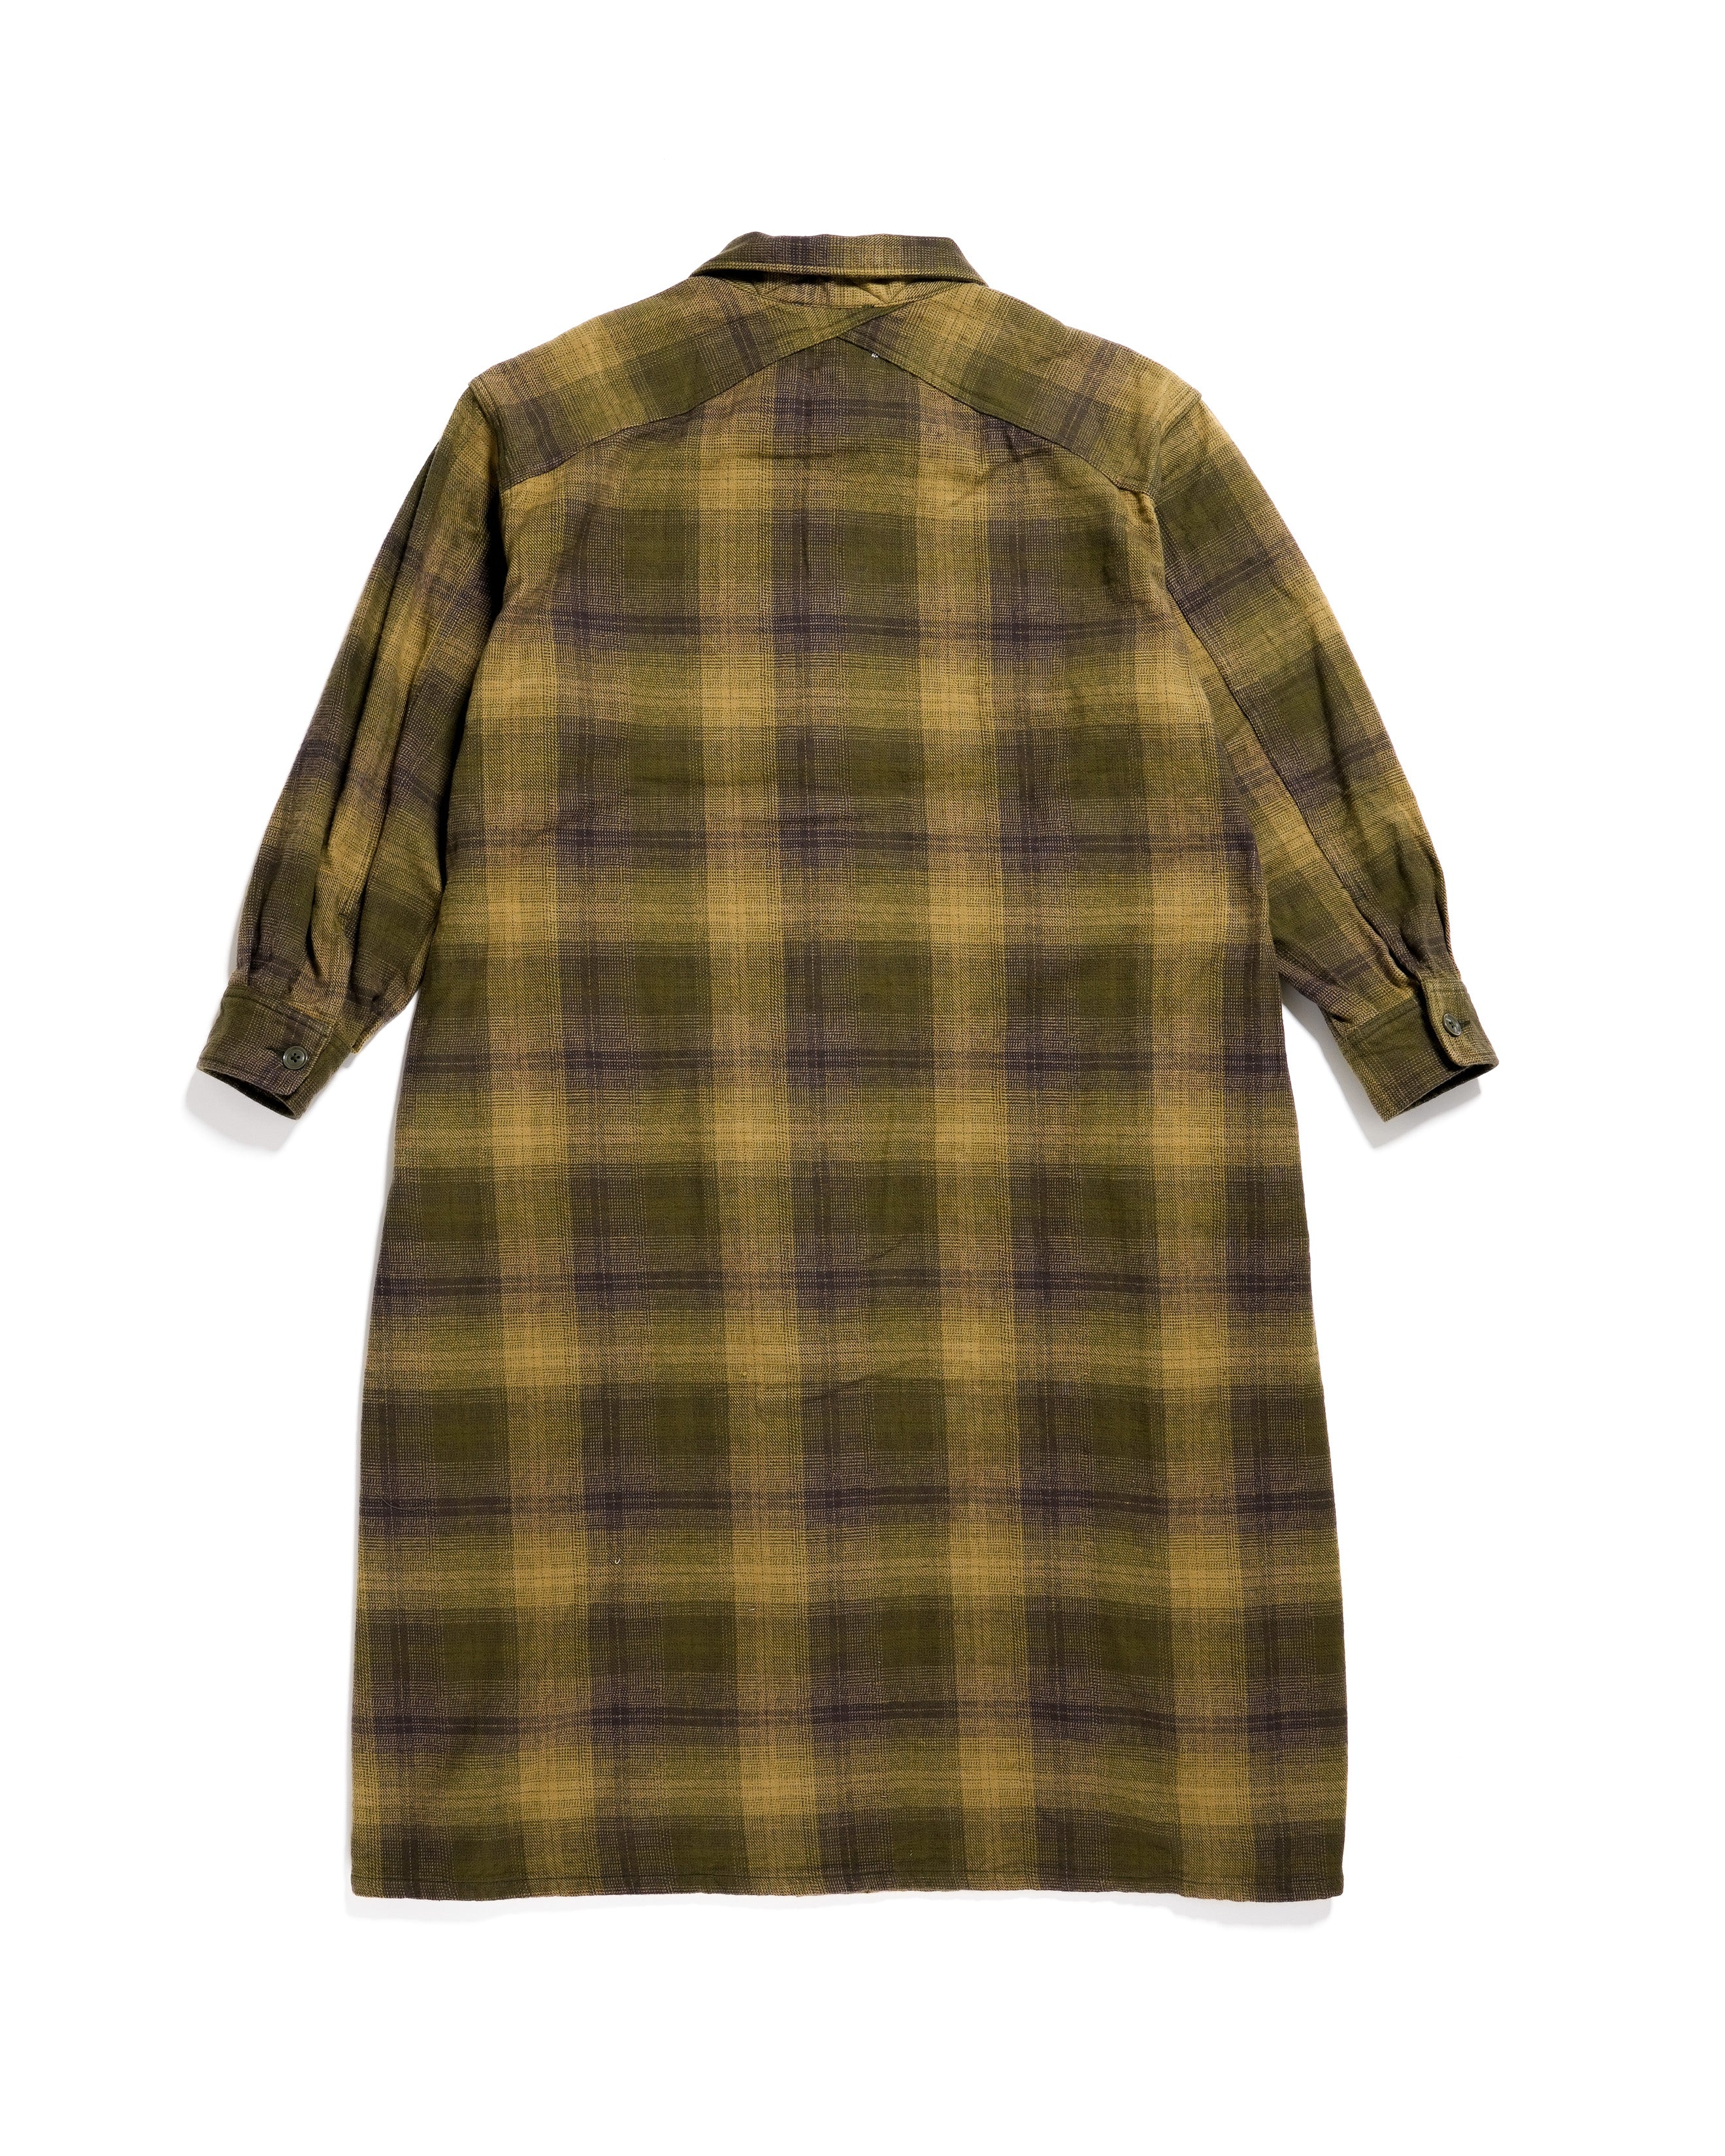 M51 Dress - Olive Check Flannel